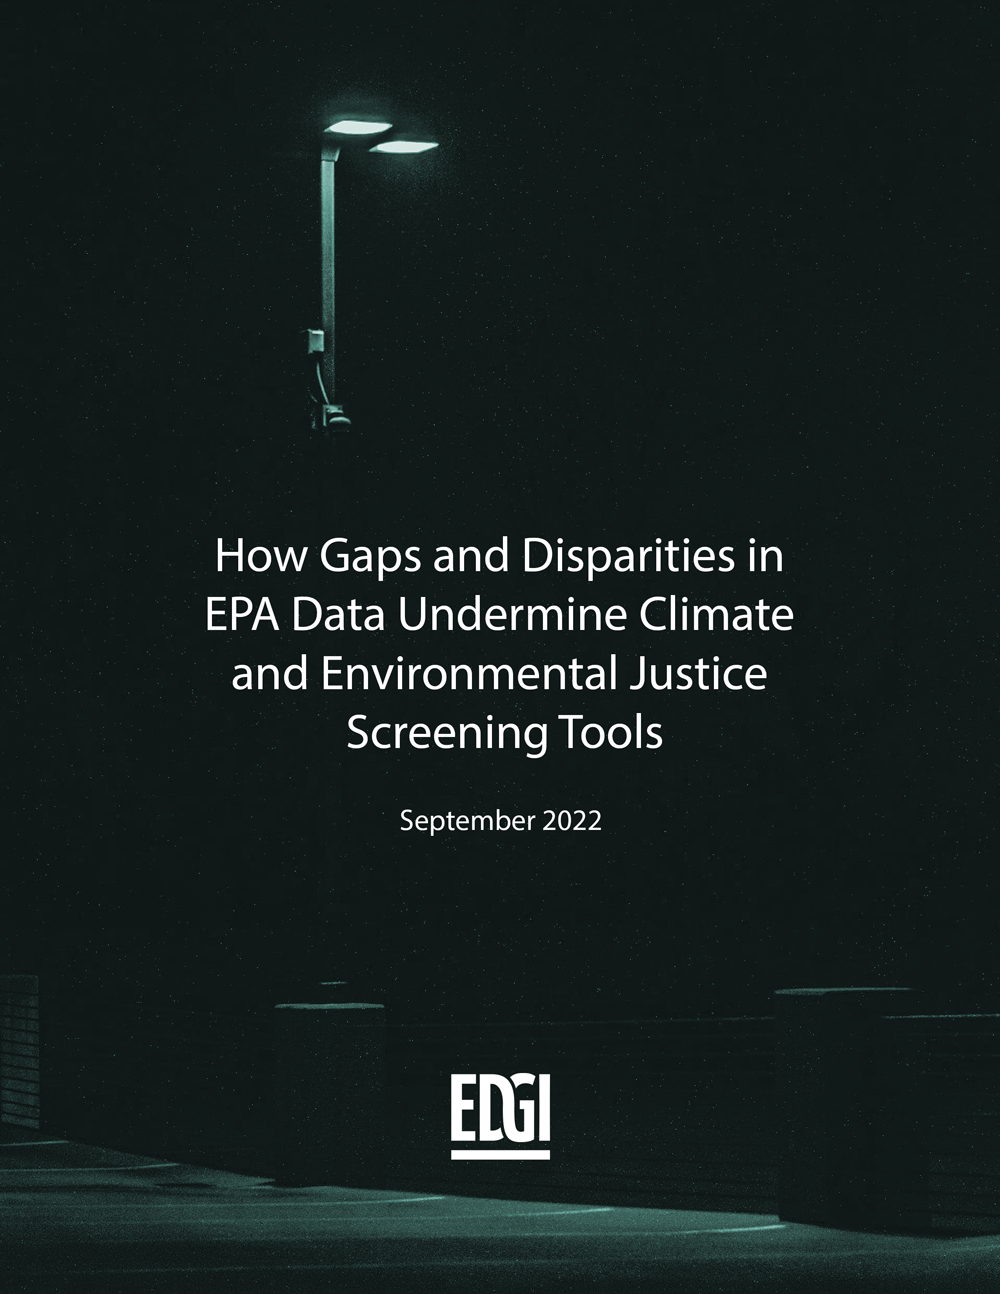 How Gaps and Disparities in EPA Data Undermine Climate and Environmental Justice Screening Tools